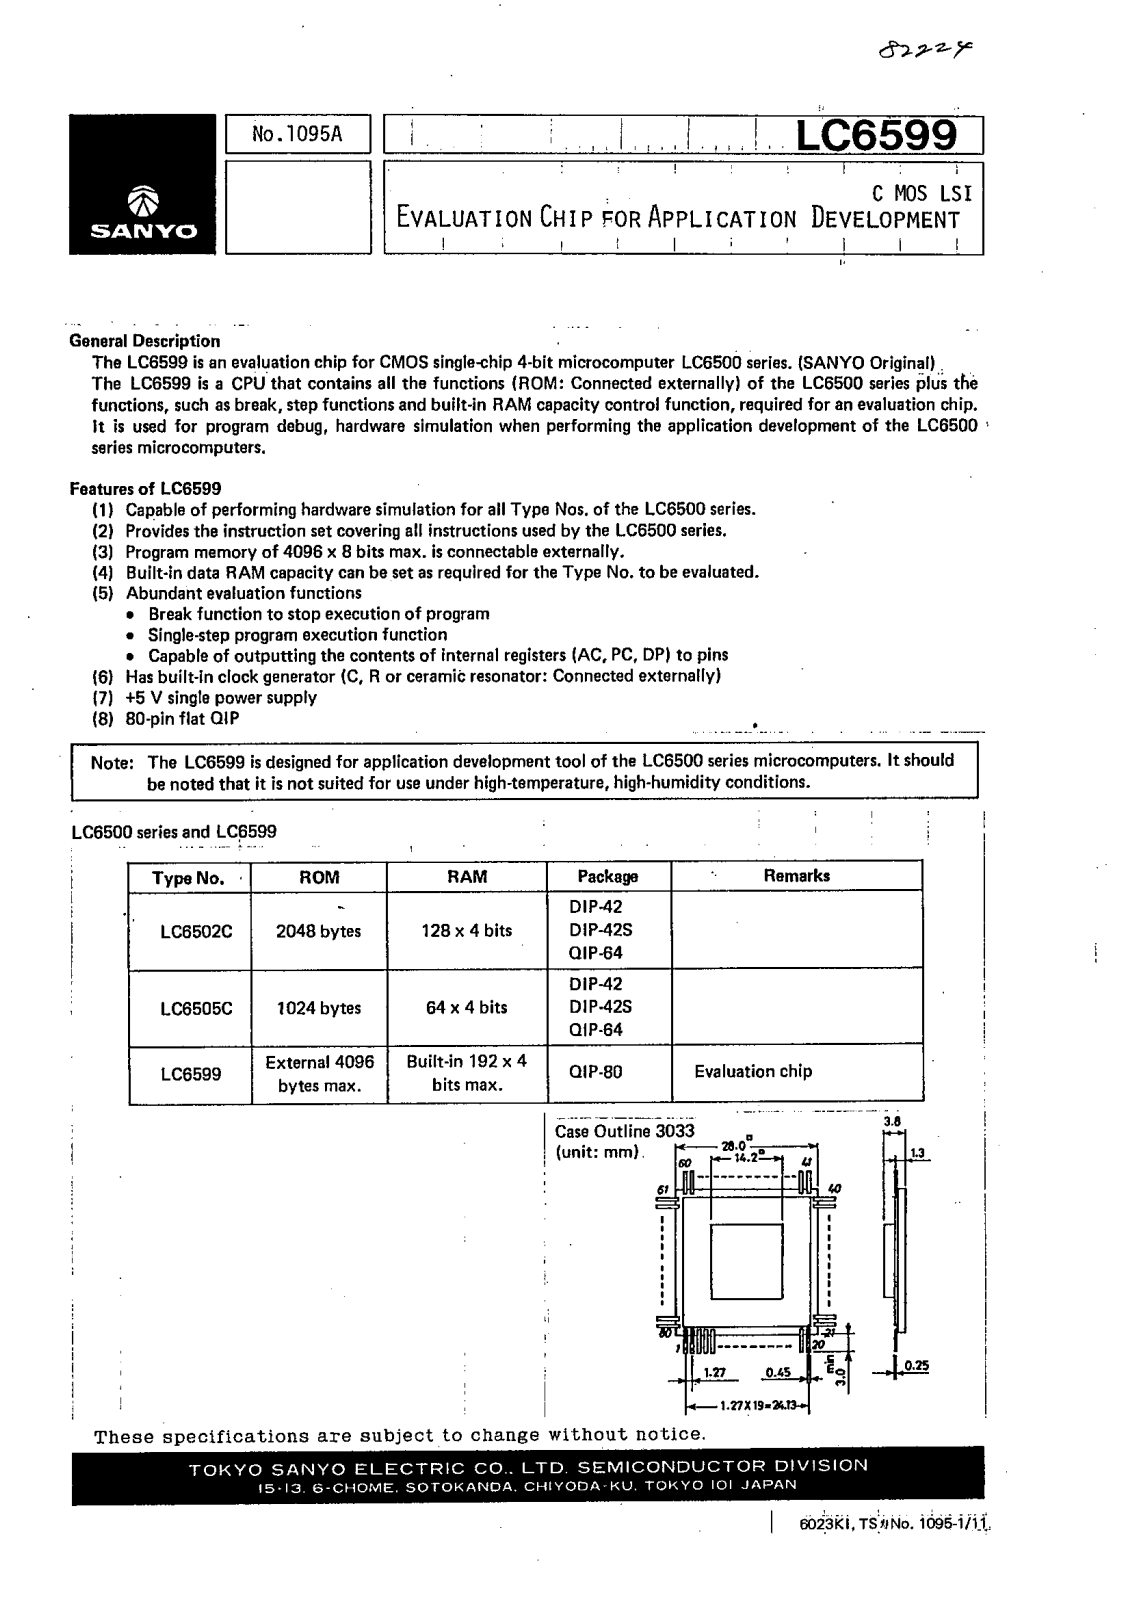 Sanyo LC6599 Specifications